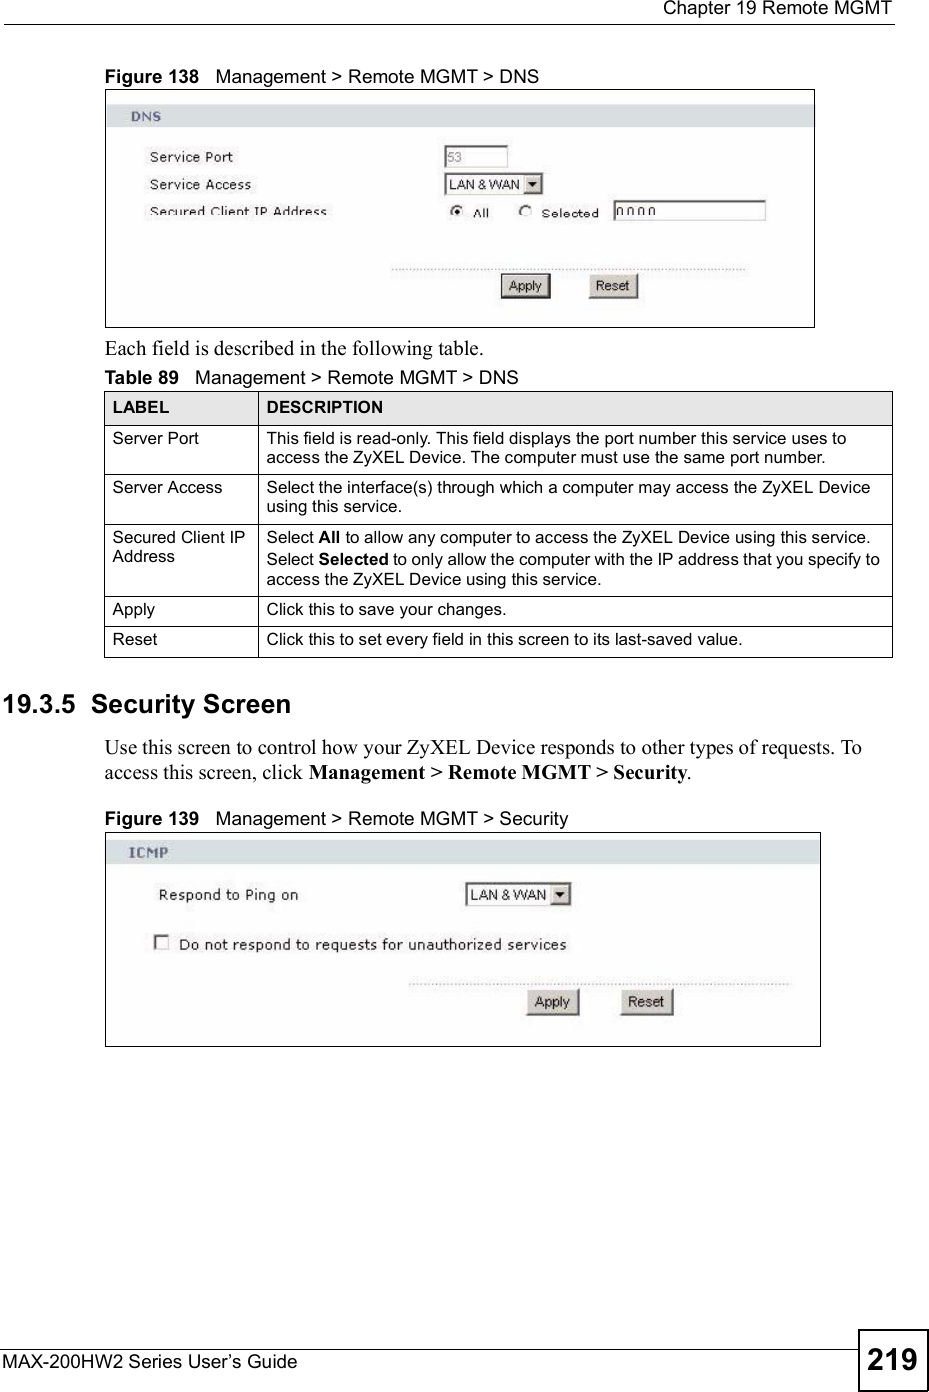  Chapter 19Remote MGMTMAX-200HW2 Series User s Guide 219Figure 138   Management &gt; Remote MGMT &gt; DNSEach field is described in the following table.19.3.5  Security ScreenUse this screen to control how your ZyXEL Device responds to other types of requests. To access this screen, click Management &gt; Remote MGMT &gt; Security.Figure 139   Management &gt; Remote MGMT &gt; SecurityTable 89   Management &gt; Remote MGMT &gt; DNSLABEL DESCRIPTIONServer Port This field is read-only. This field displays the port number this service uses to access the ZyXEL Device. The computer must use the same port number.Server Access Select the interface(s) through which a computer may access the ZyXEL Device using this service.Secured Client IP AddressSelect All to allow any computer to access the ZyXEL Device using this service.Select Selected to only allow the computer with the IP address that you specify to access the ZyXEL Device using this service.Apply Click this to save your changes.Reset Click this to set every field in this screen to its last-saved value.